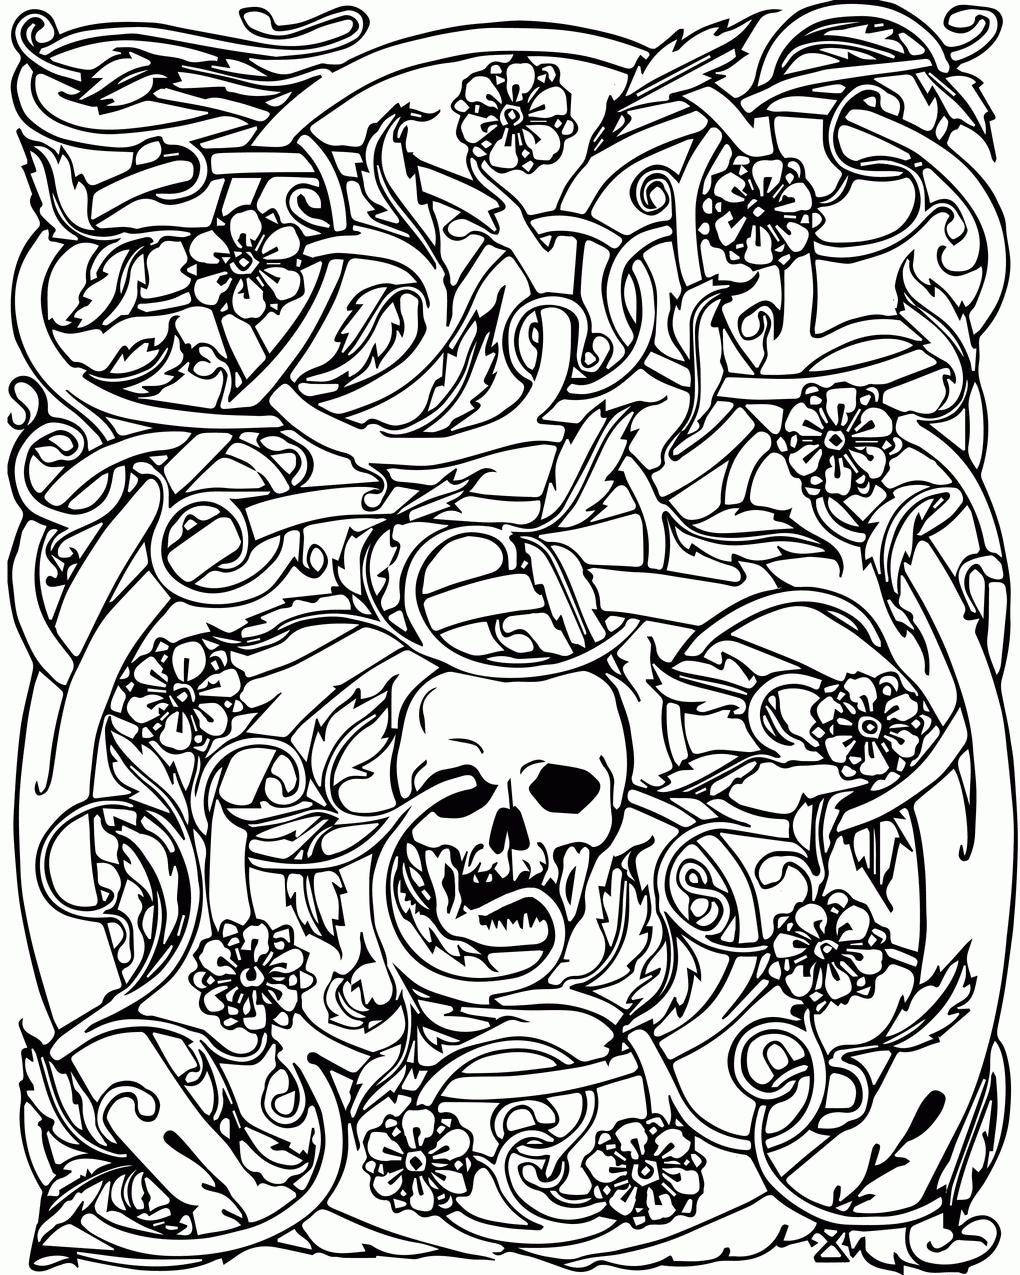 Free Adult Halloween Coloring Pages » Coloring Pages Kids